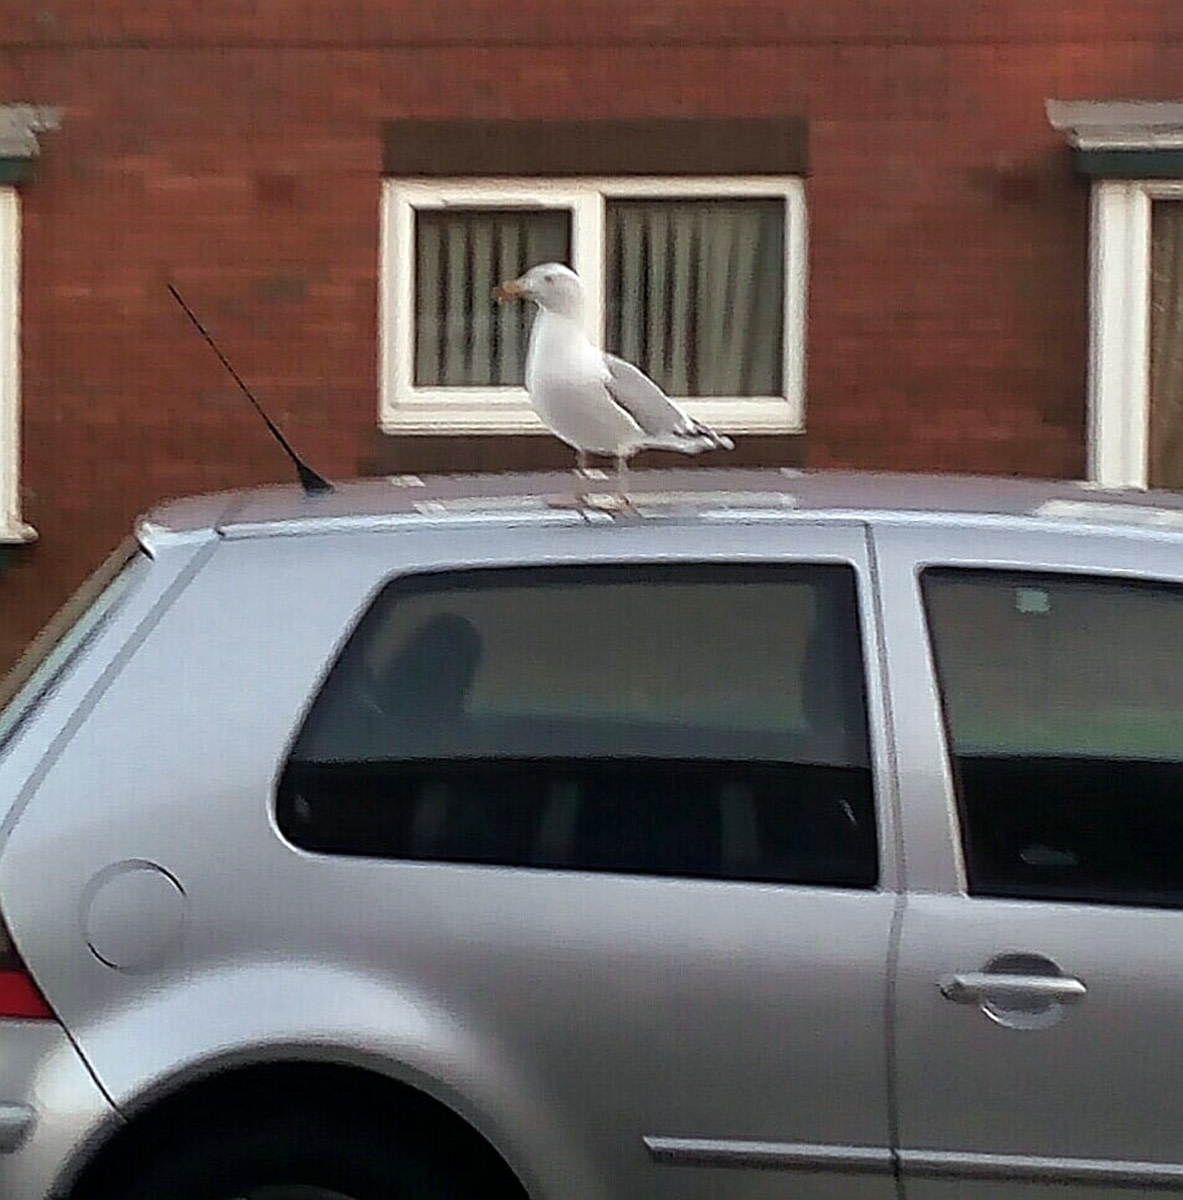 One of the seagulls that waited outside mum's flat perched on my car.